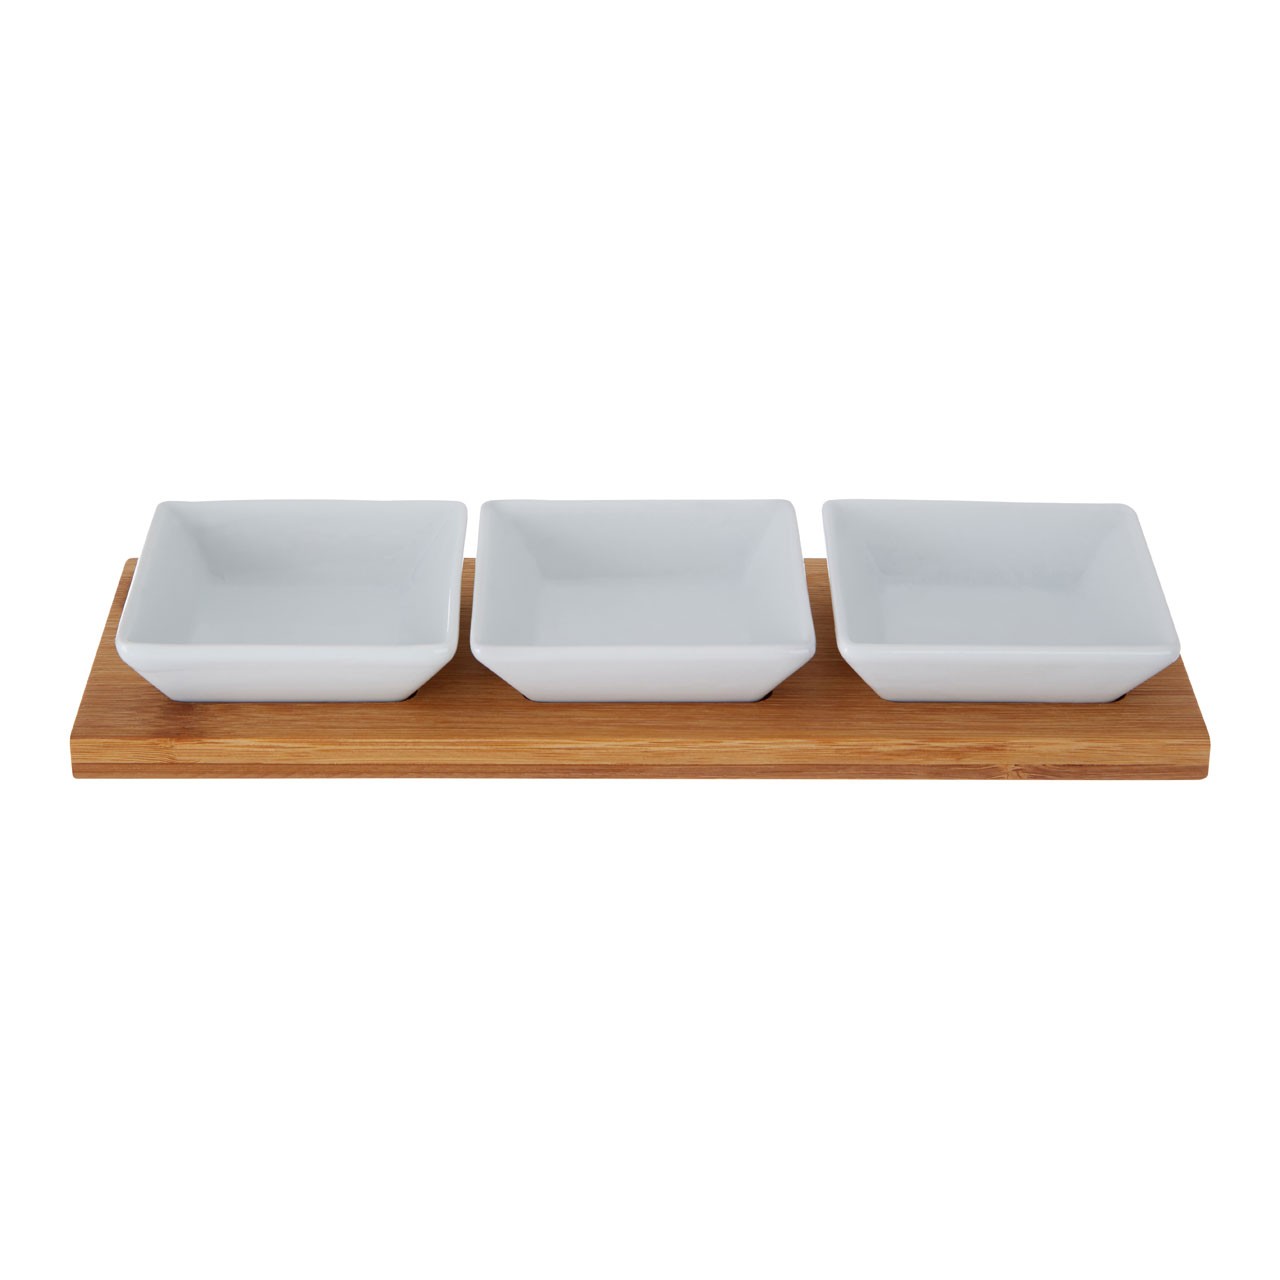 Square Snack Bowls on Bamboo Tray - White, Set of 3